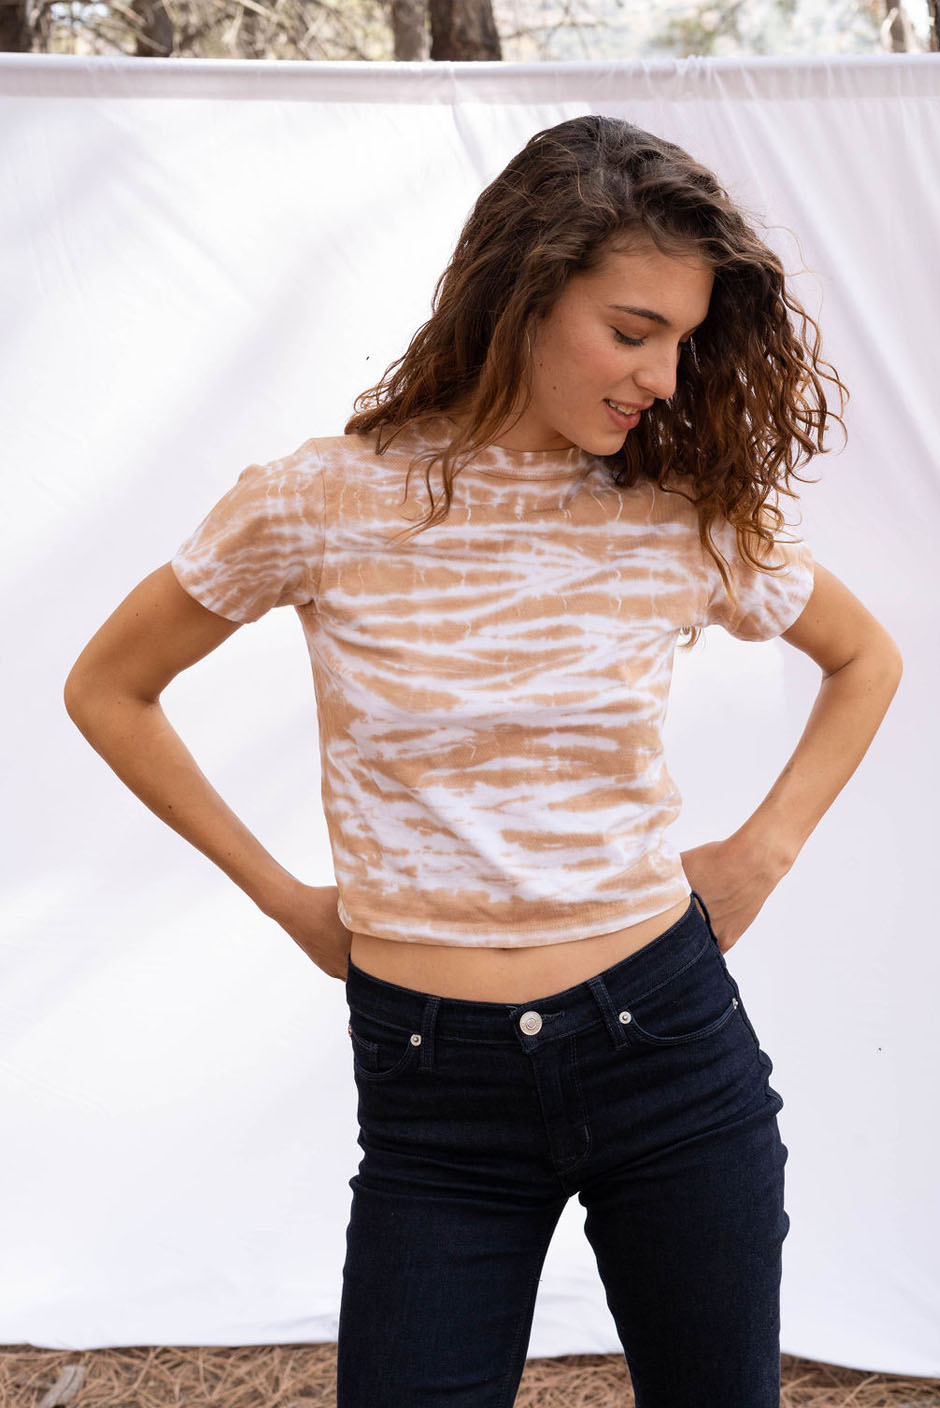 Vintage Cotton Crop Tee in Sand beige color for women by Paneros Clothing. Hand tie-dyed casual top from sustainable cotton. Front View close up styled with jeans.